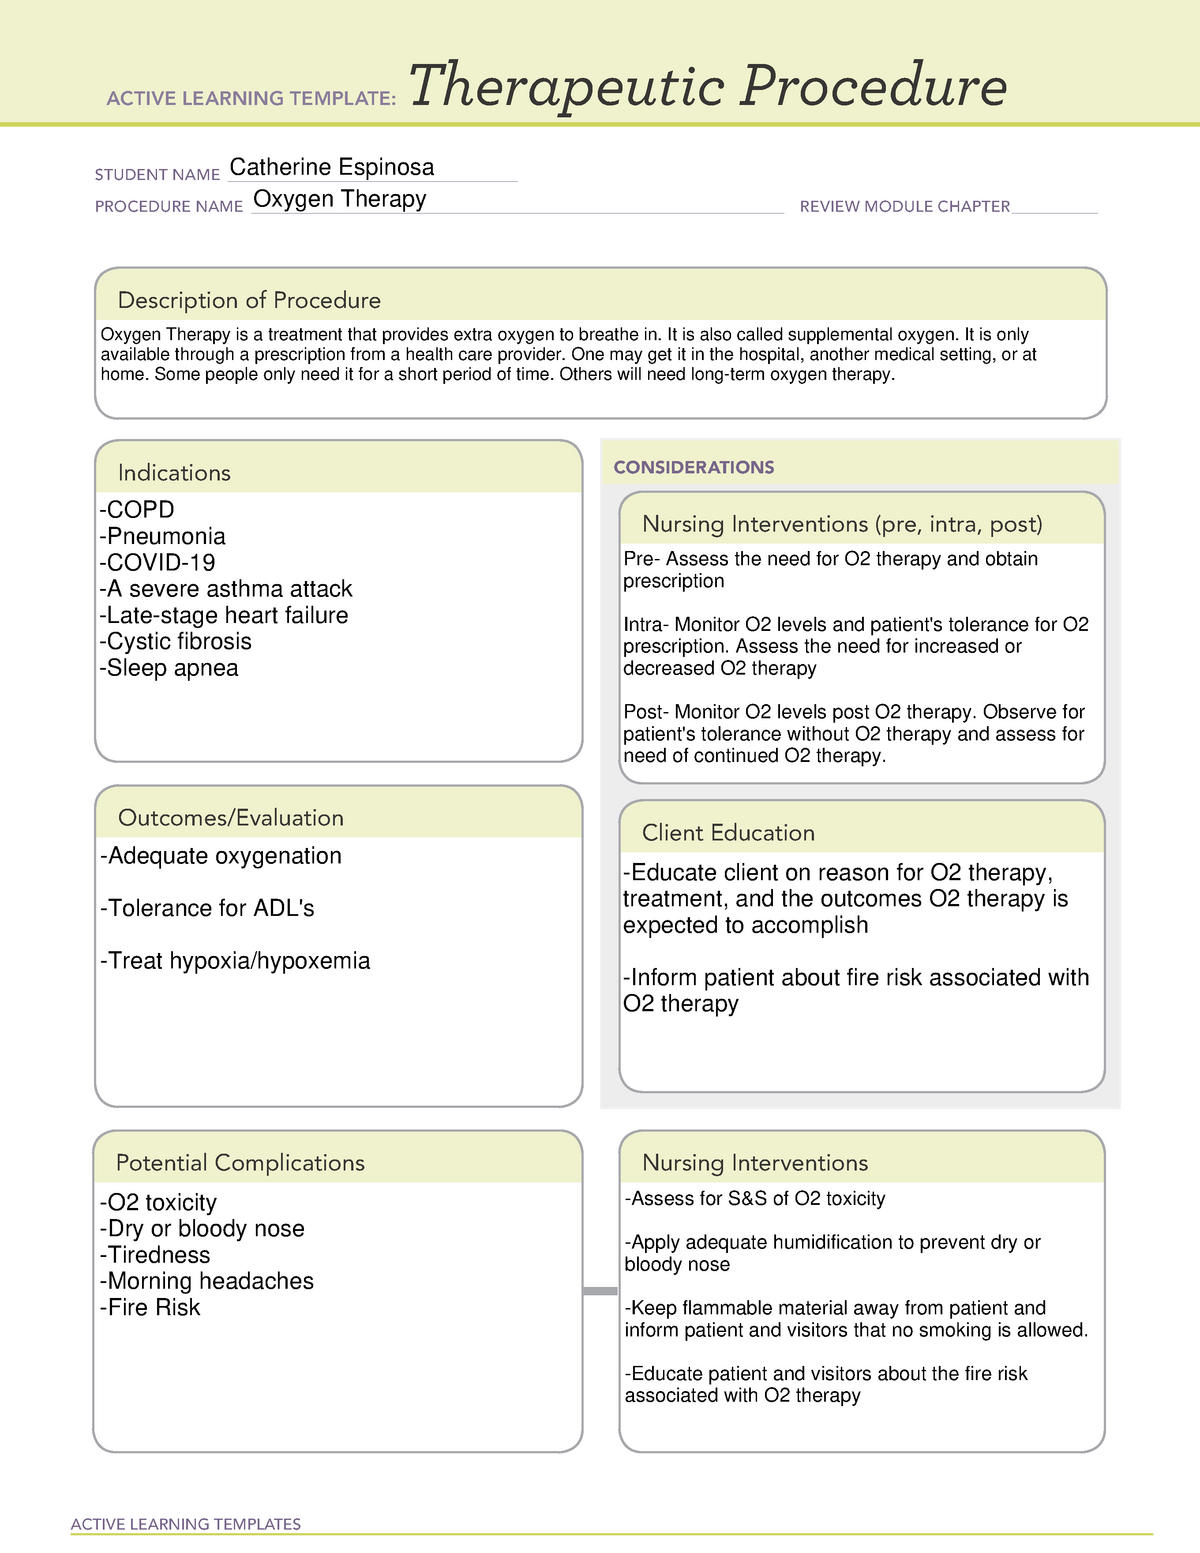 oxygen-therapy-therapeutic-procedure-active-learning-templates